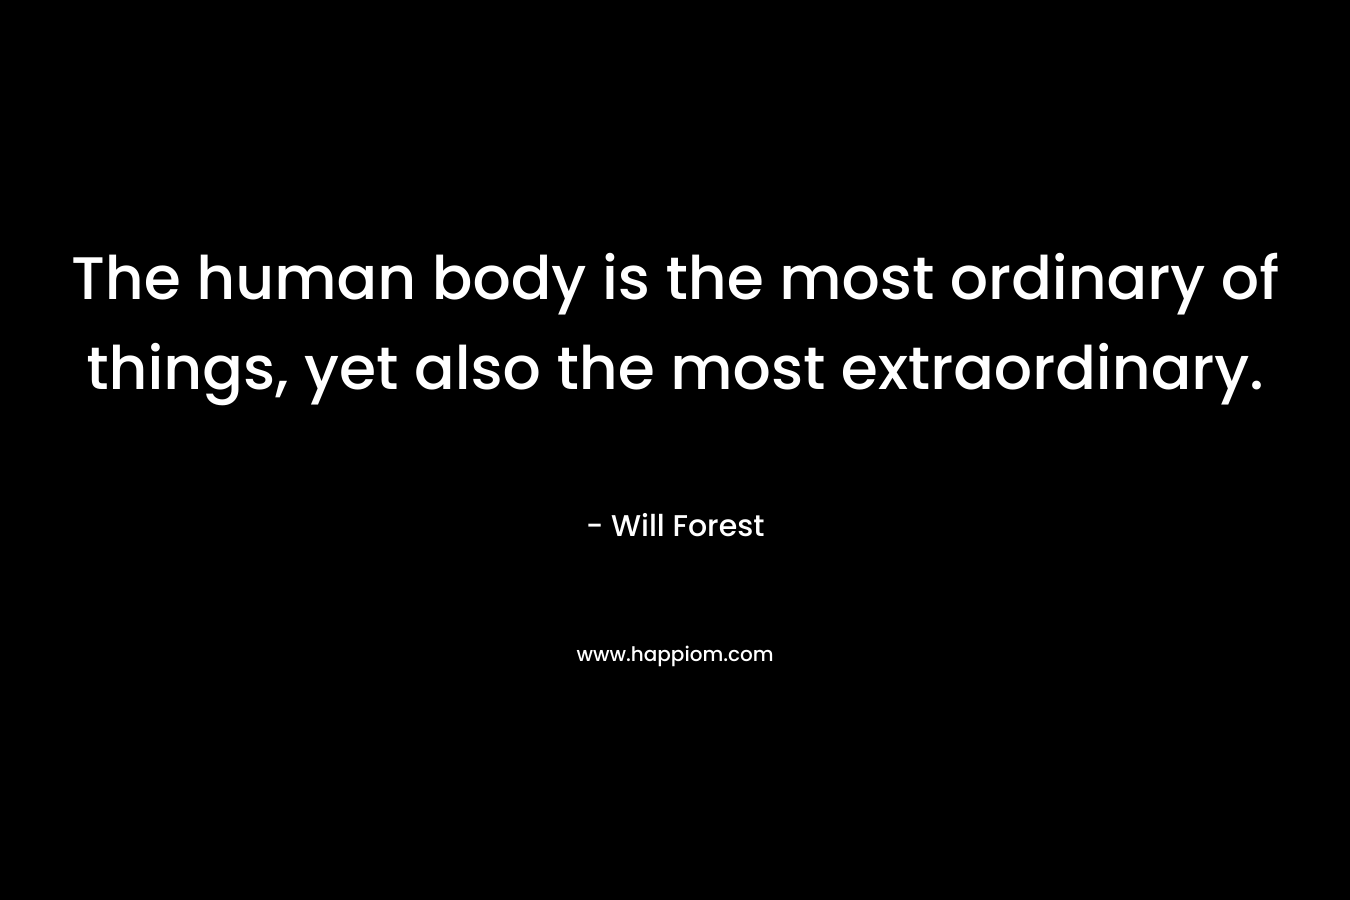 The human body is the most ordinary of things, yet also the most extraordinary. – Will Forest